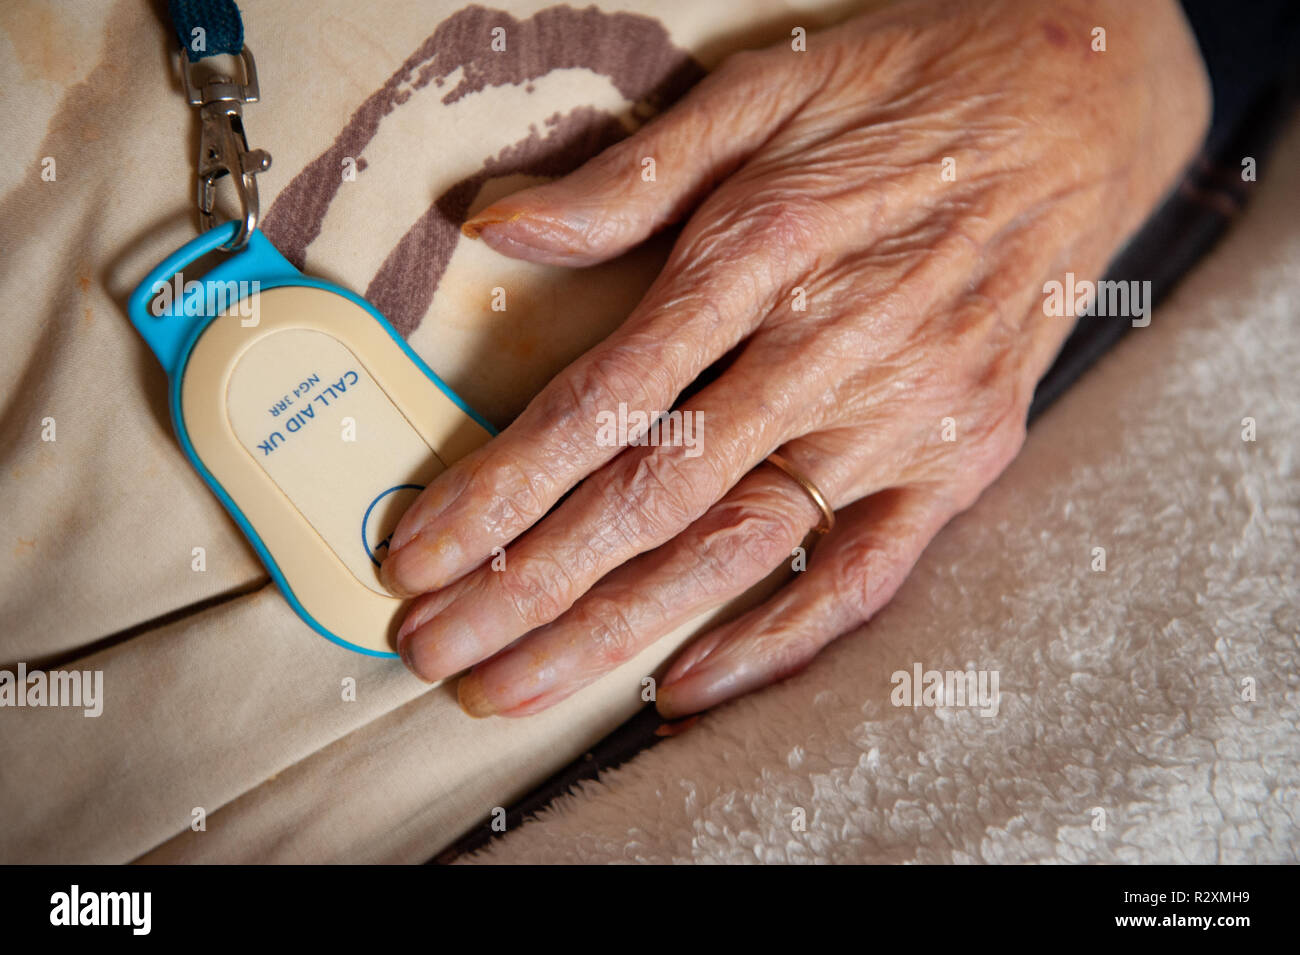 Old lady's hand showing age, call button and gold wedding band. Stock Photo